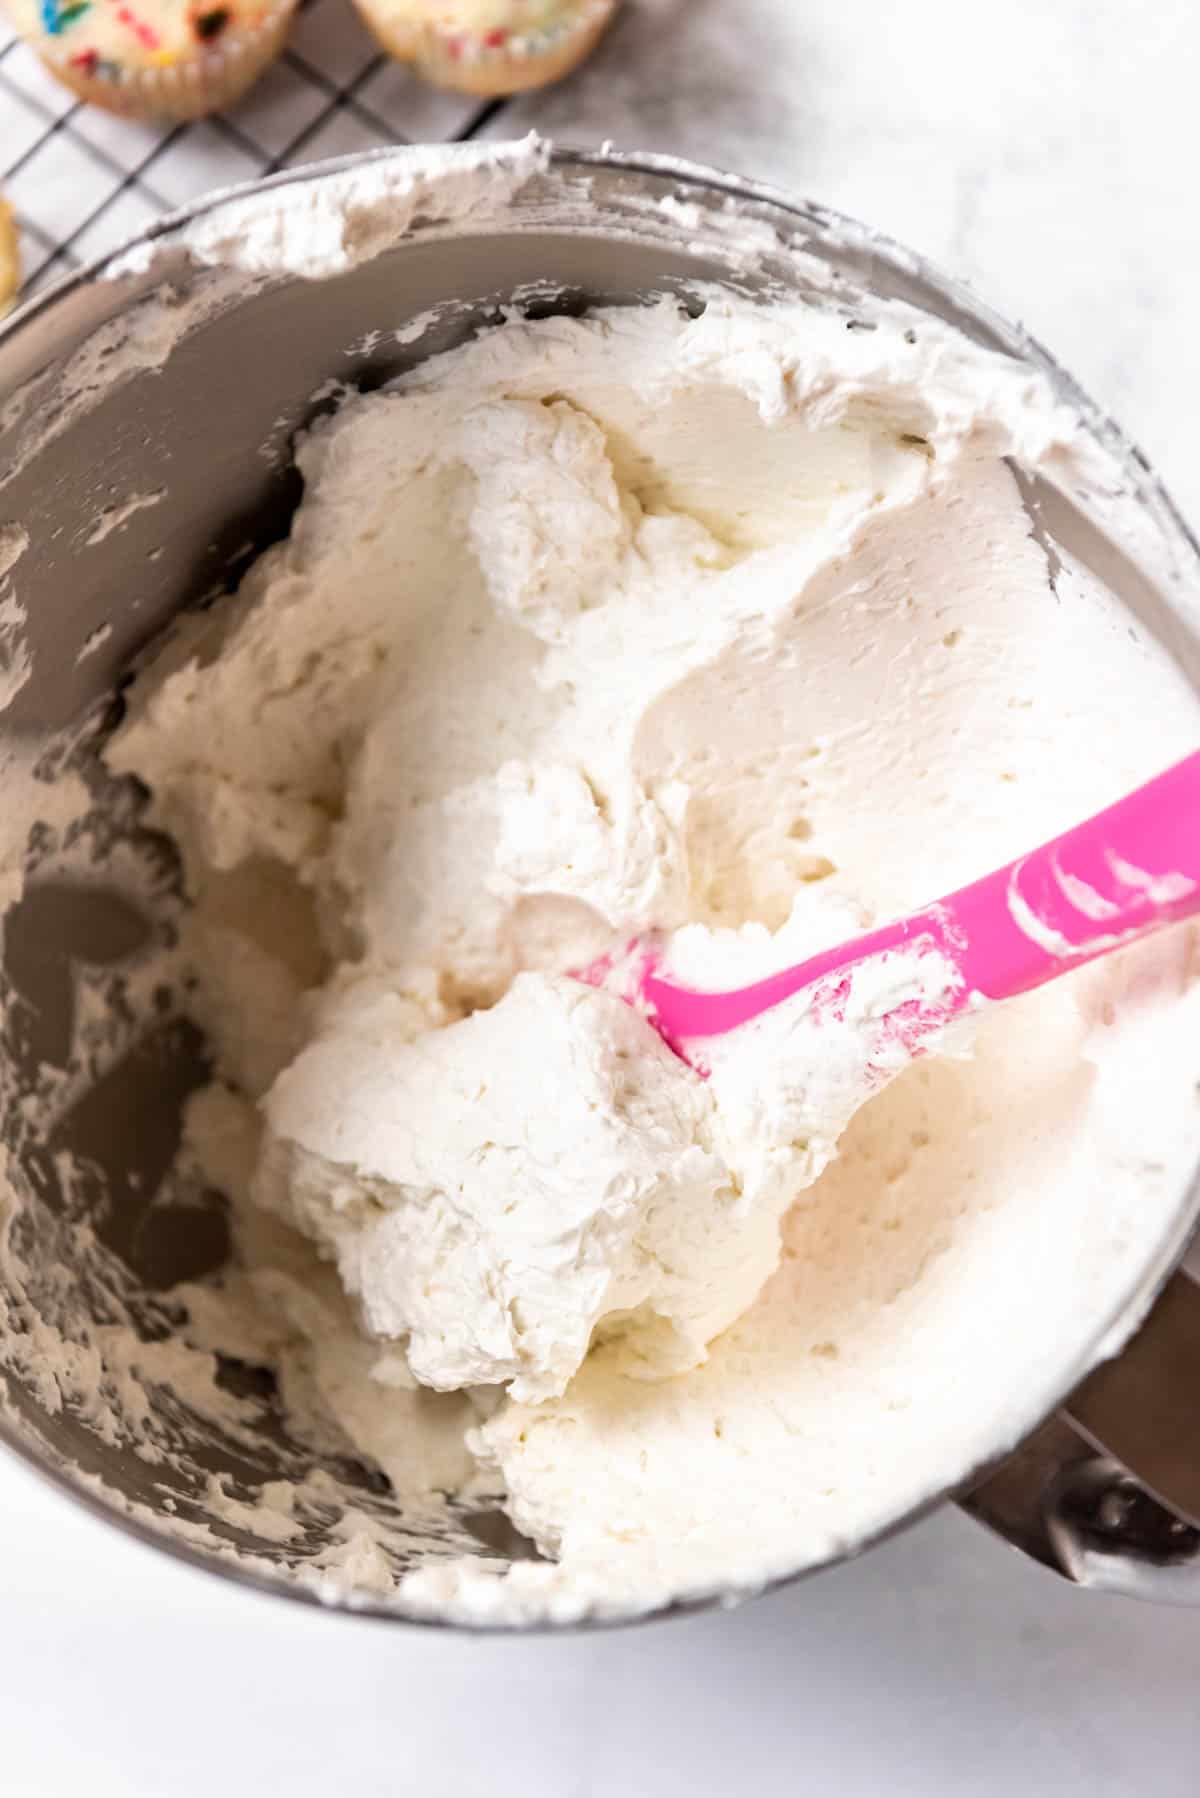 A pink spatula in a bowl full of white Swiss meringue buttercream frosting.